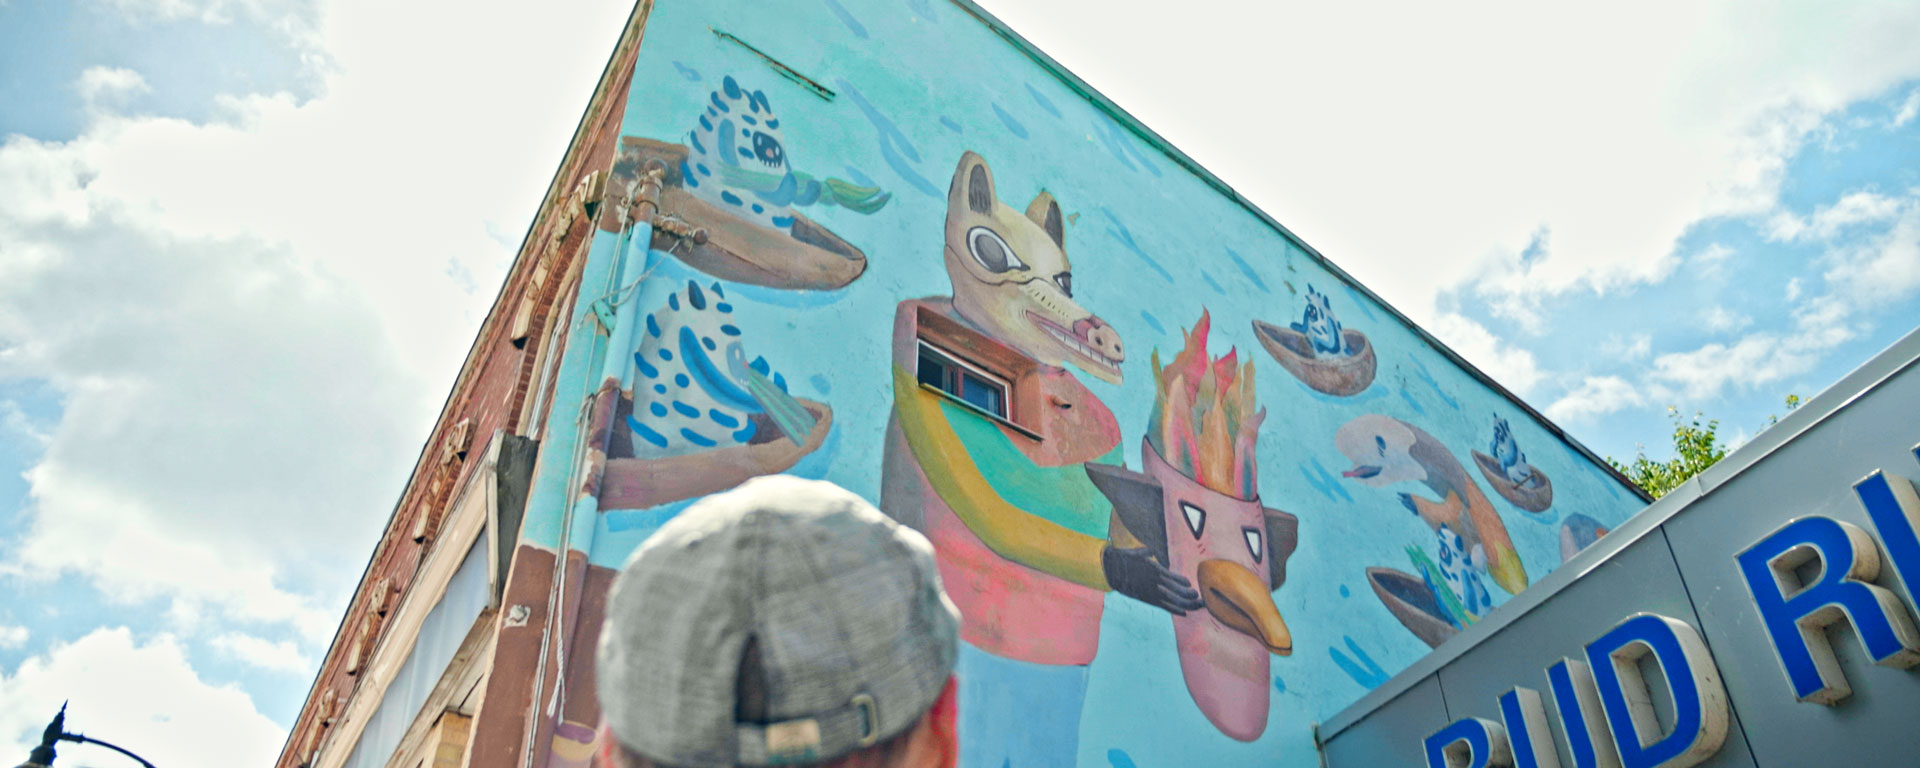 the camera is pointed up towards a large wall mural of an animal type character in Paisley